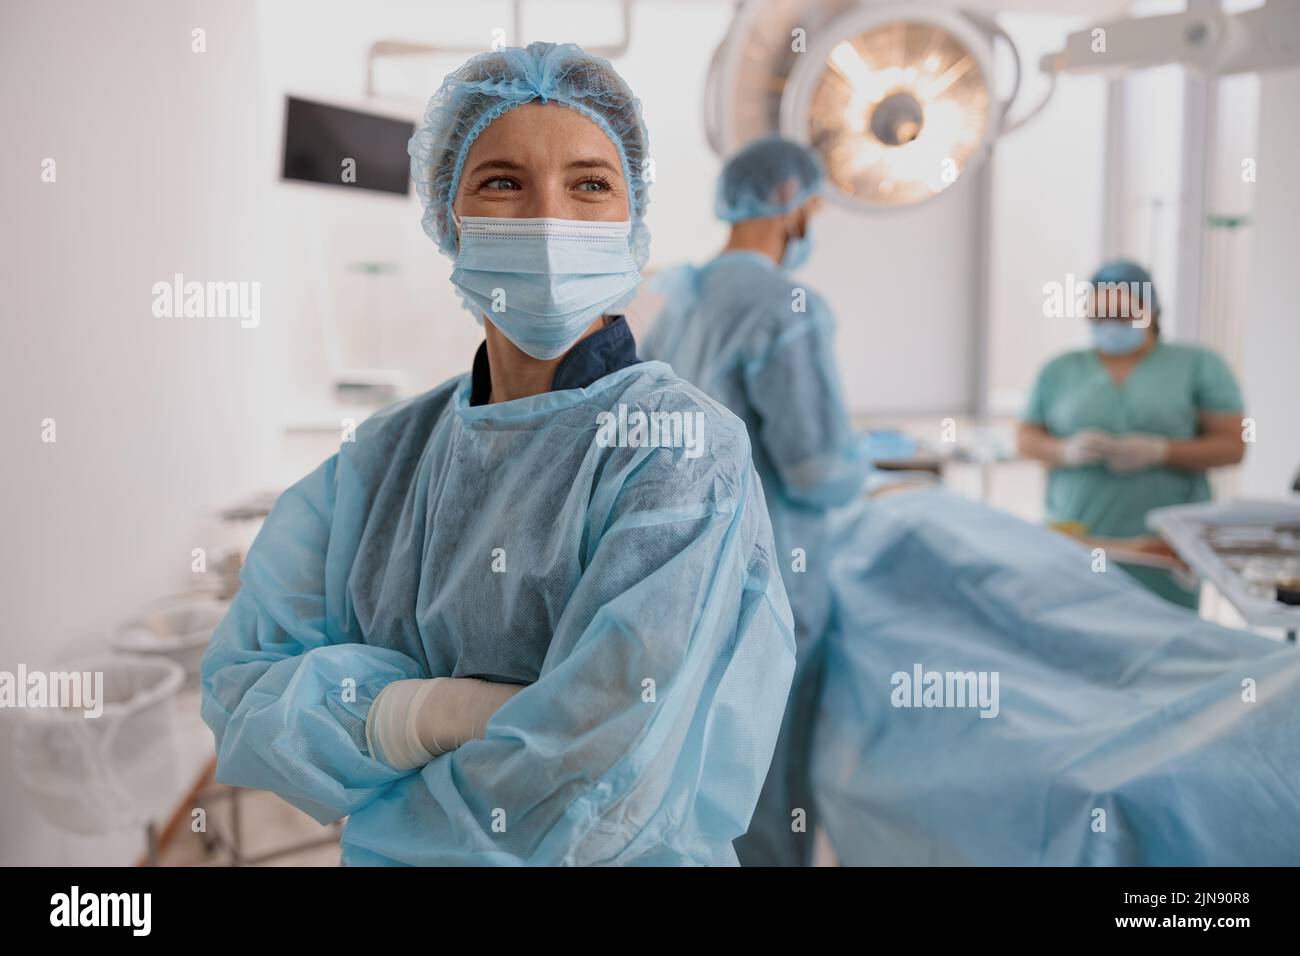 Female surgeon in mask standing in operating room with crossing hands, ready to work on patient Stock Photo